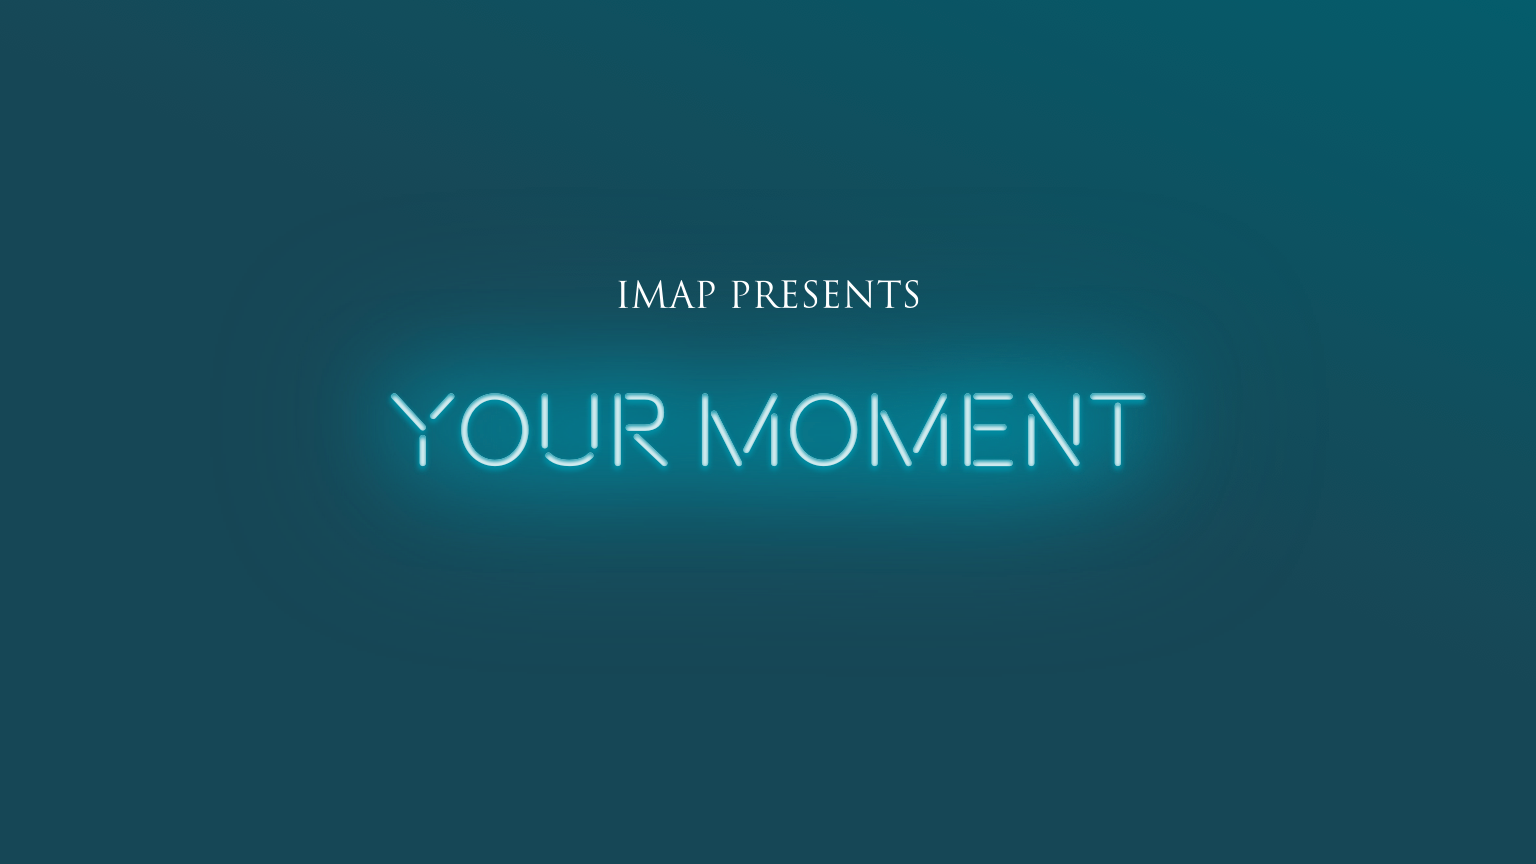 imap presents your moment.